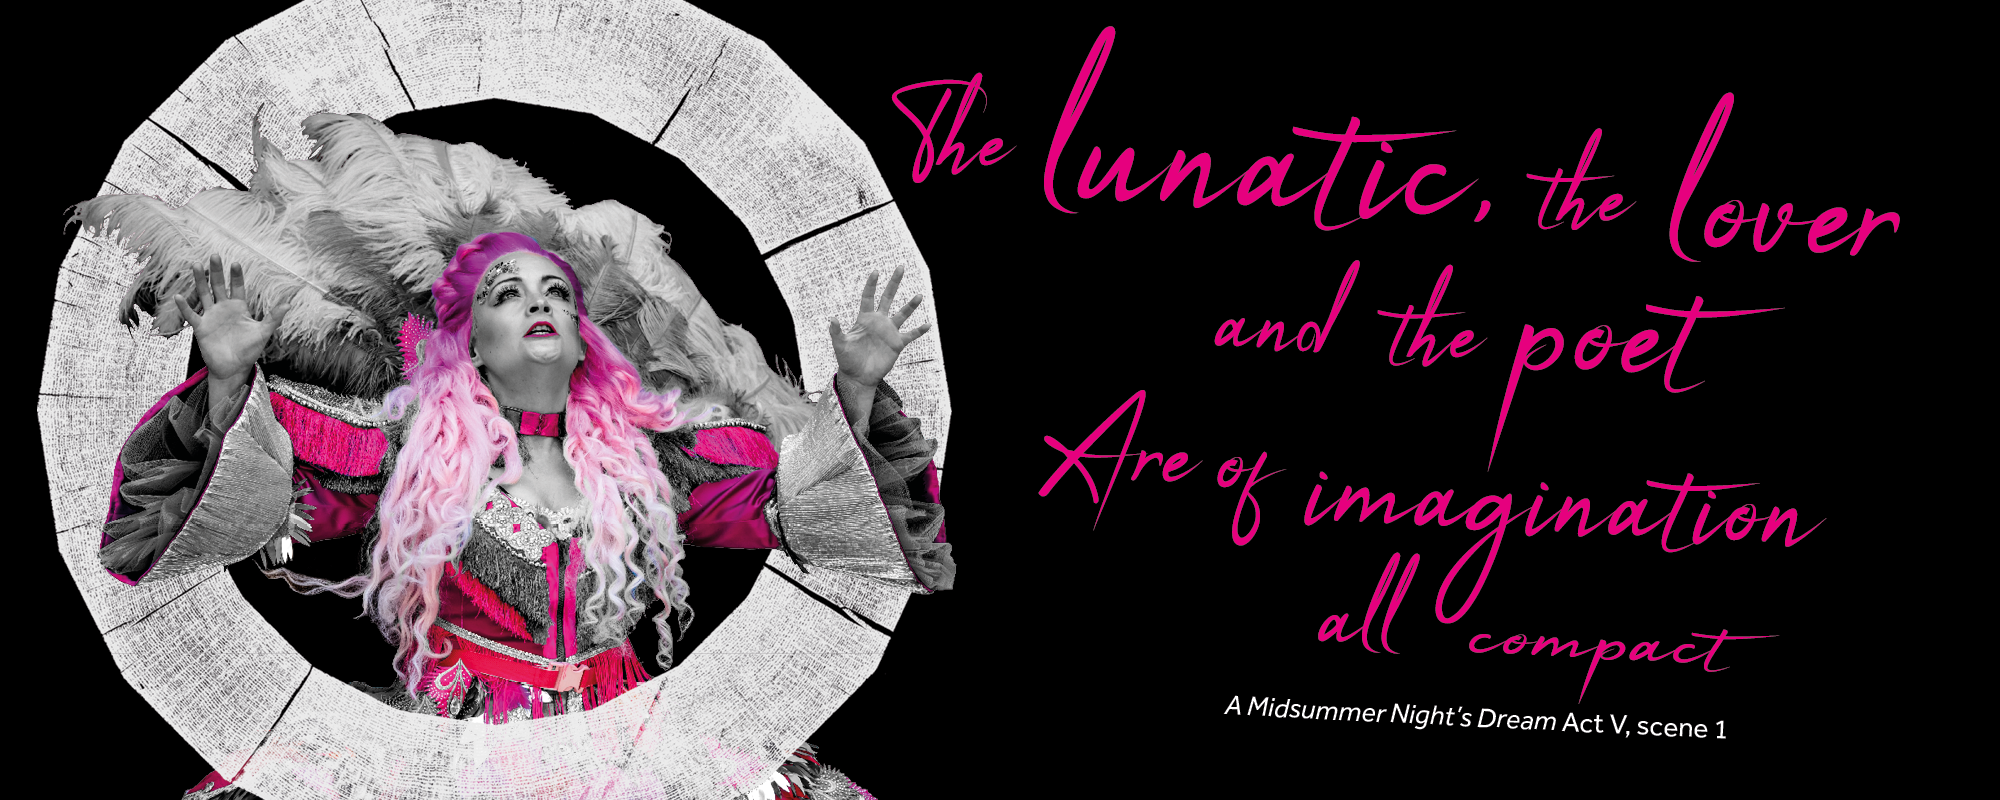 Titania emerges from the logo, the quote beside her reads 'the lunatic, the lover and the poet are of the imagination all compact' from A Midsummer Night's Dream